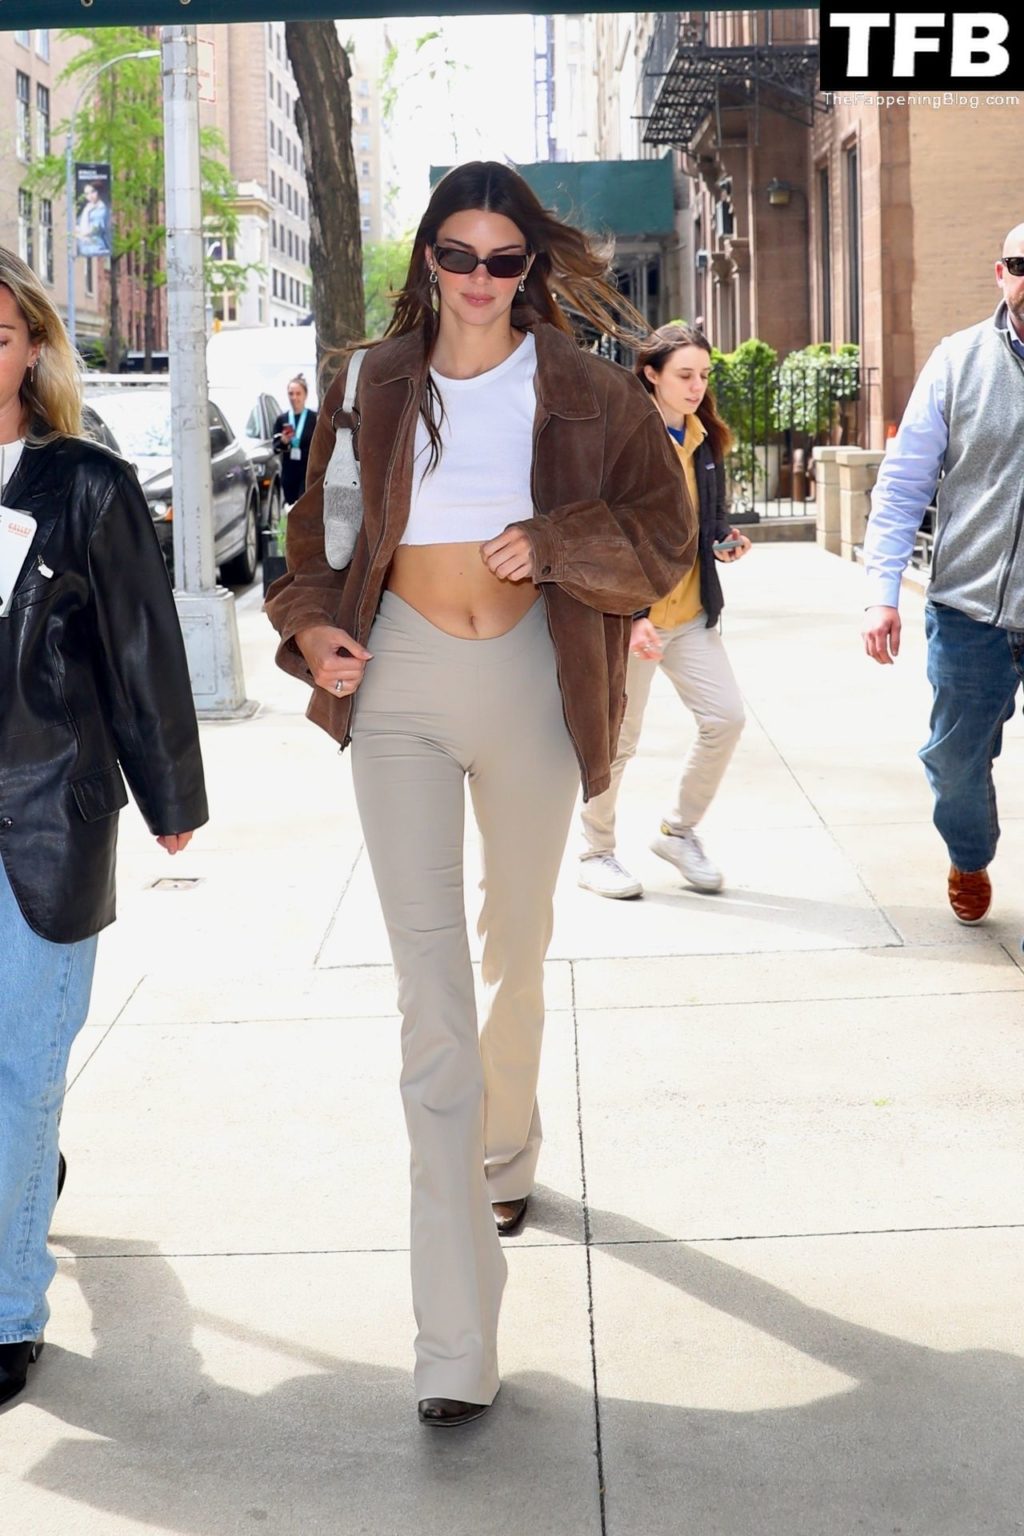 Kendall Jenner Sexy The Fappening Blog 34 1024x1536 - Kendall Jenner is All Smiling While Arriving at The Carlyle Hotel For Fitting For the MET Gala (56 Photos)